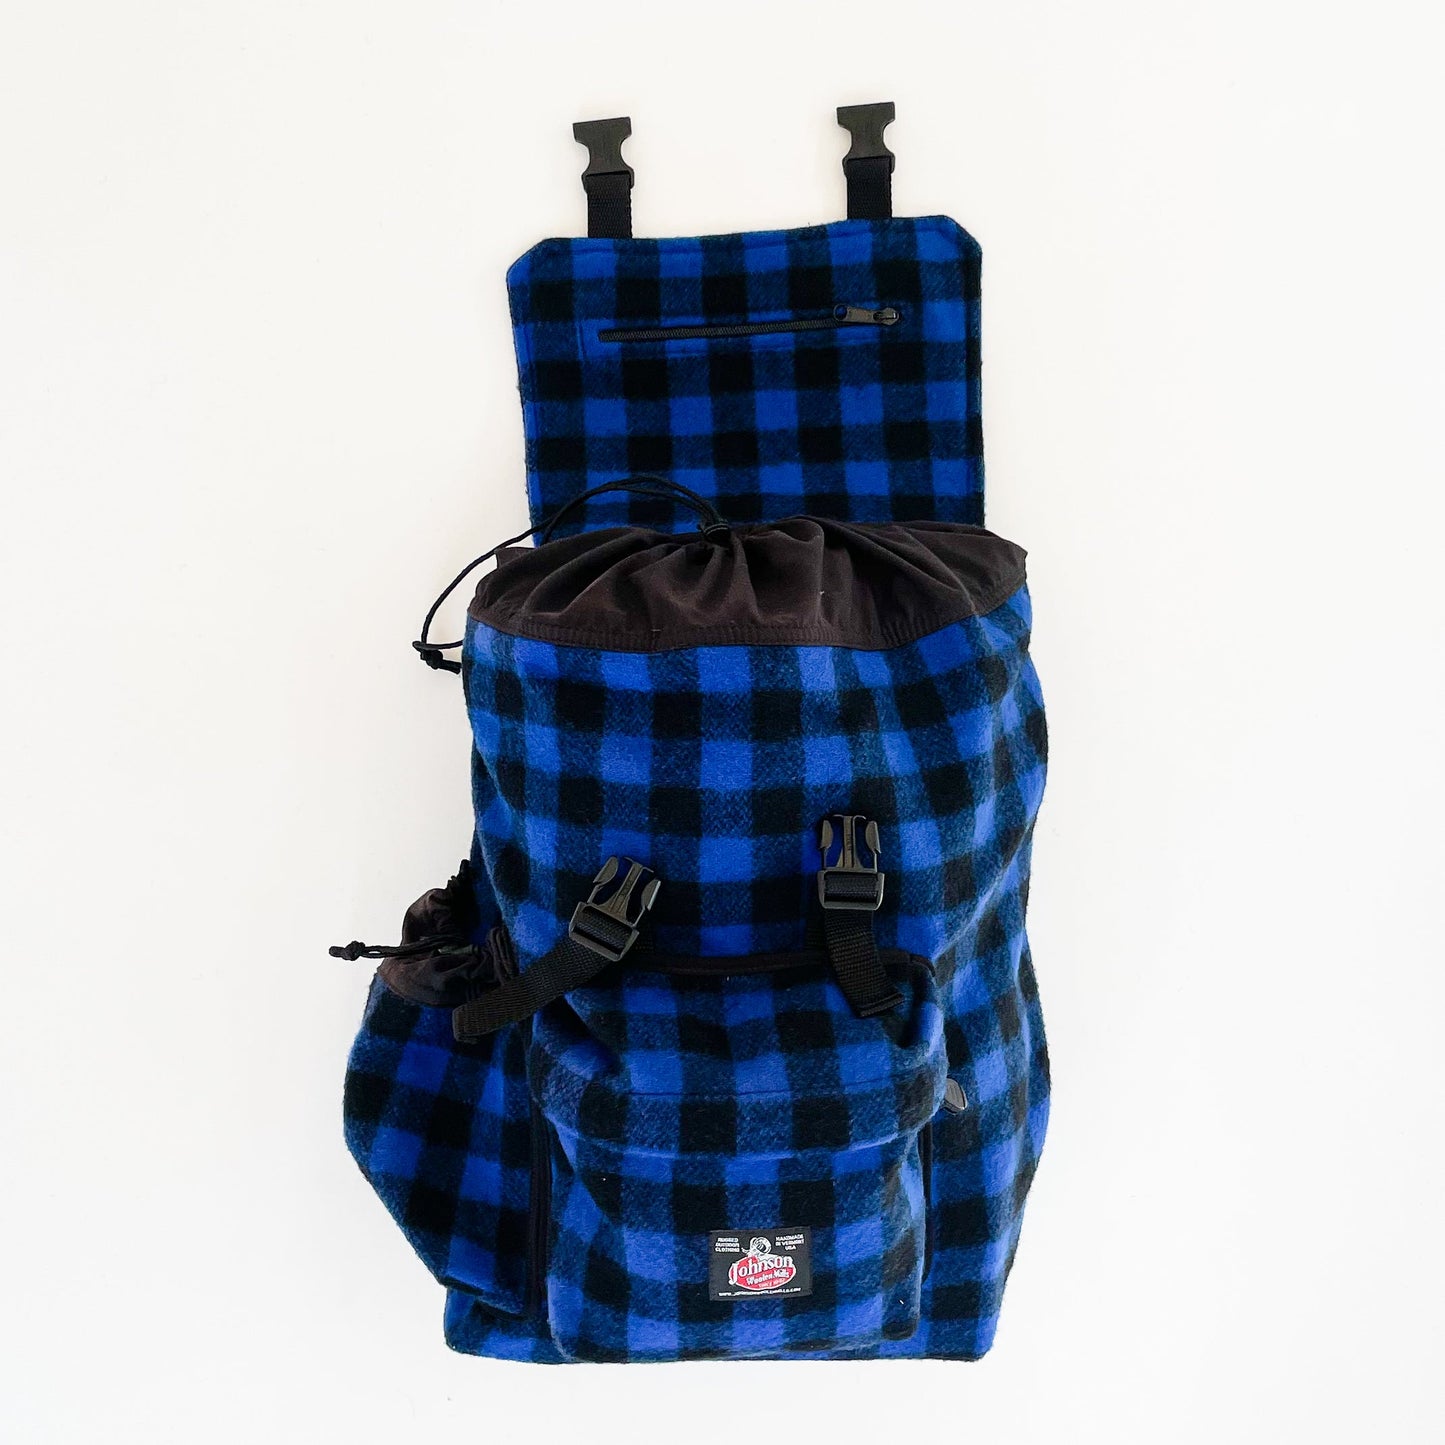 Johnson Woolen Mills Daypack Blue & Black 1 inch buffalo squares front view with water bottle in side pocket